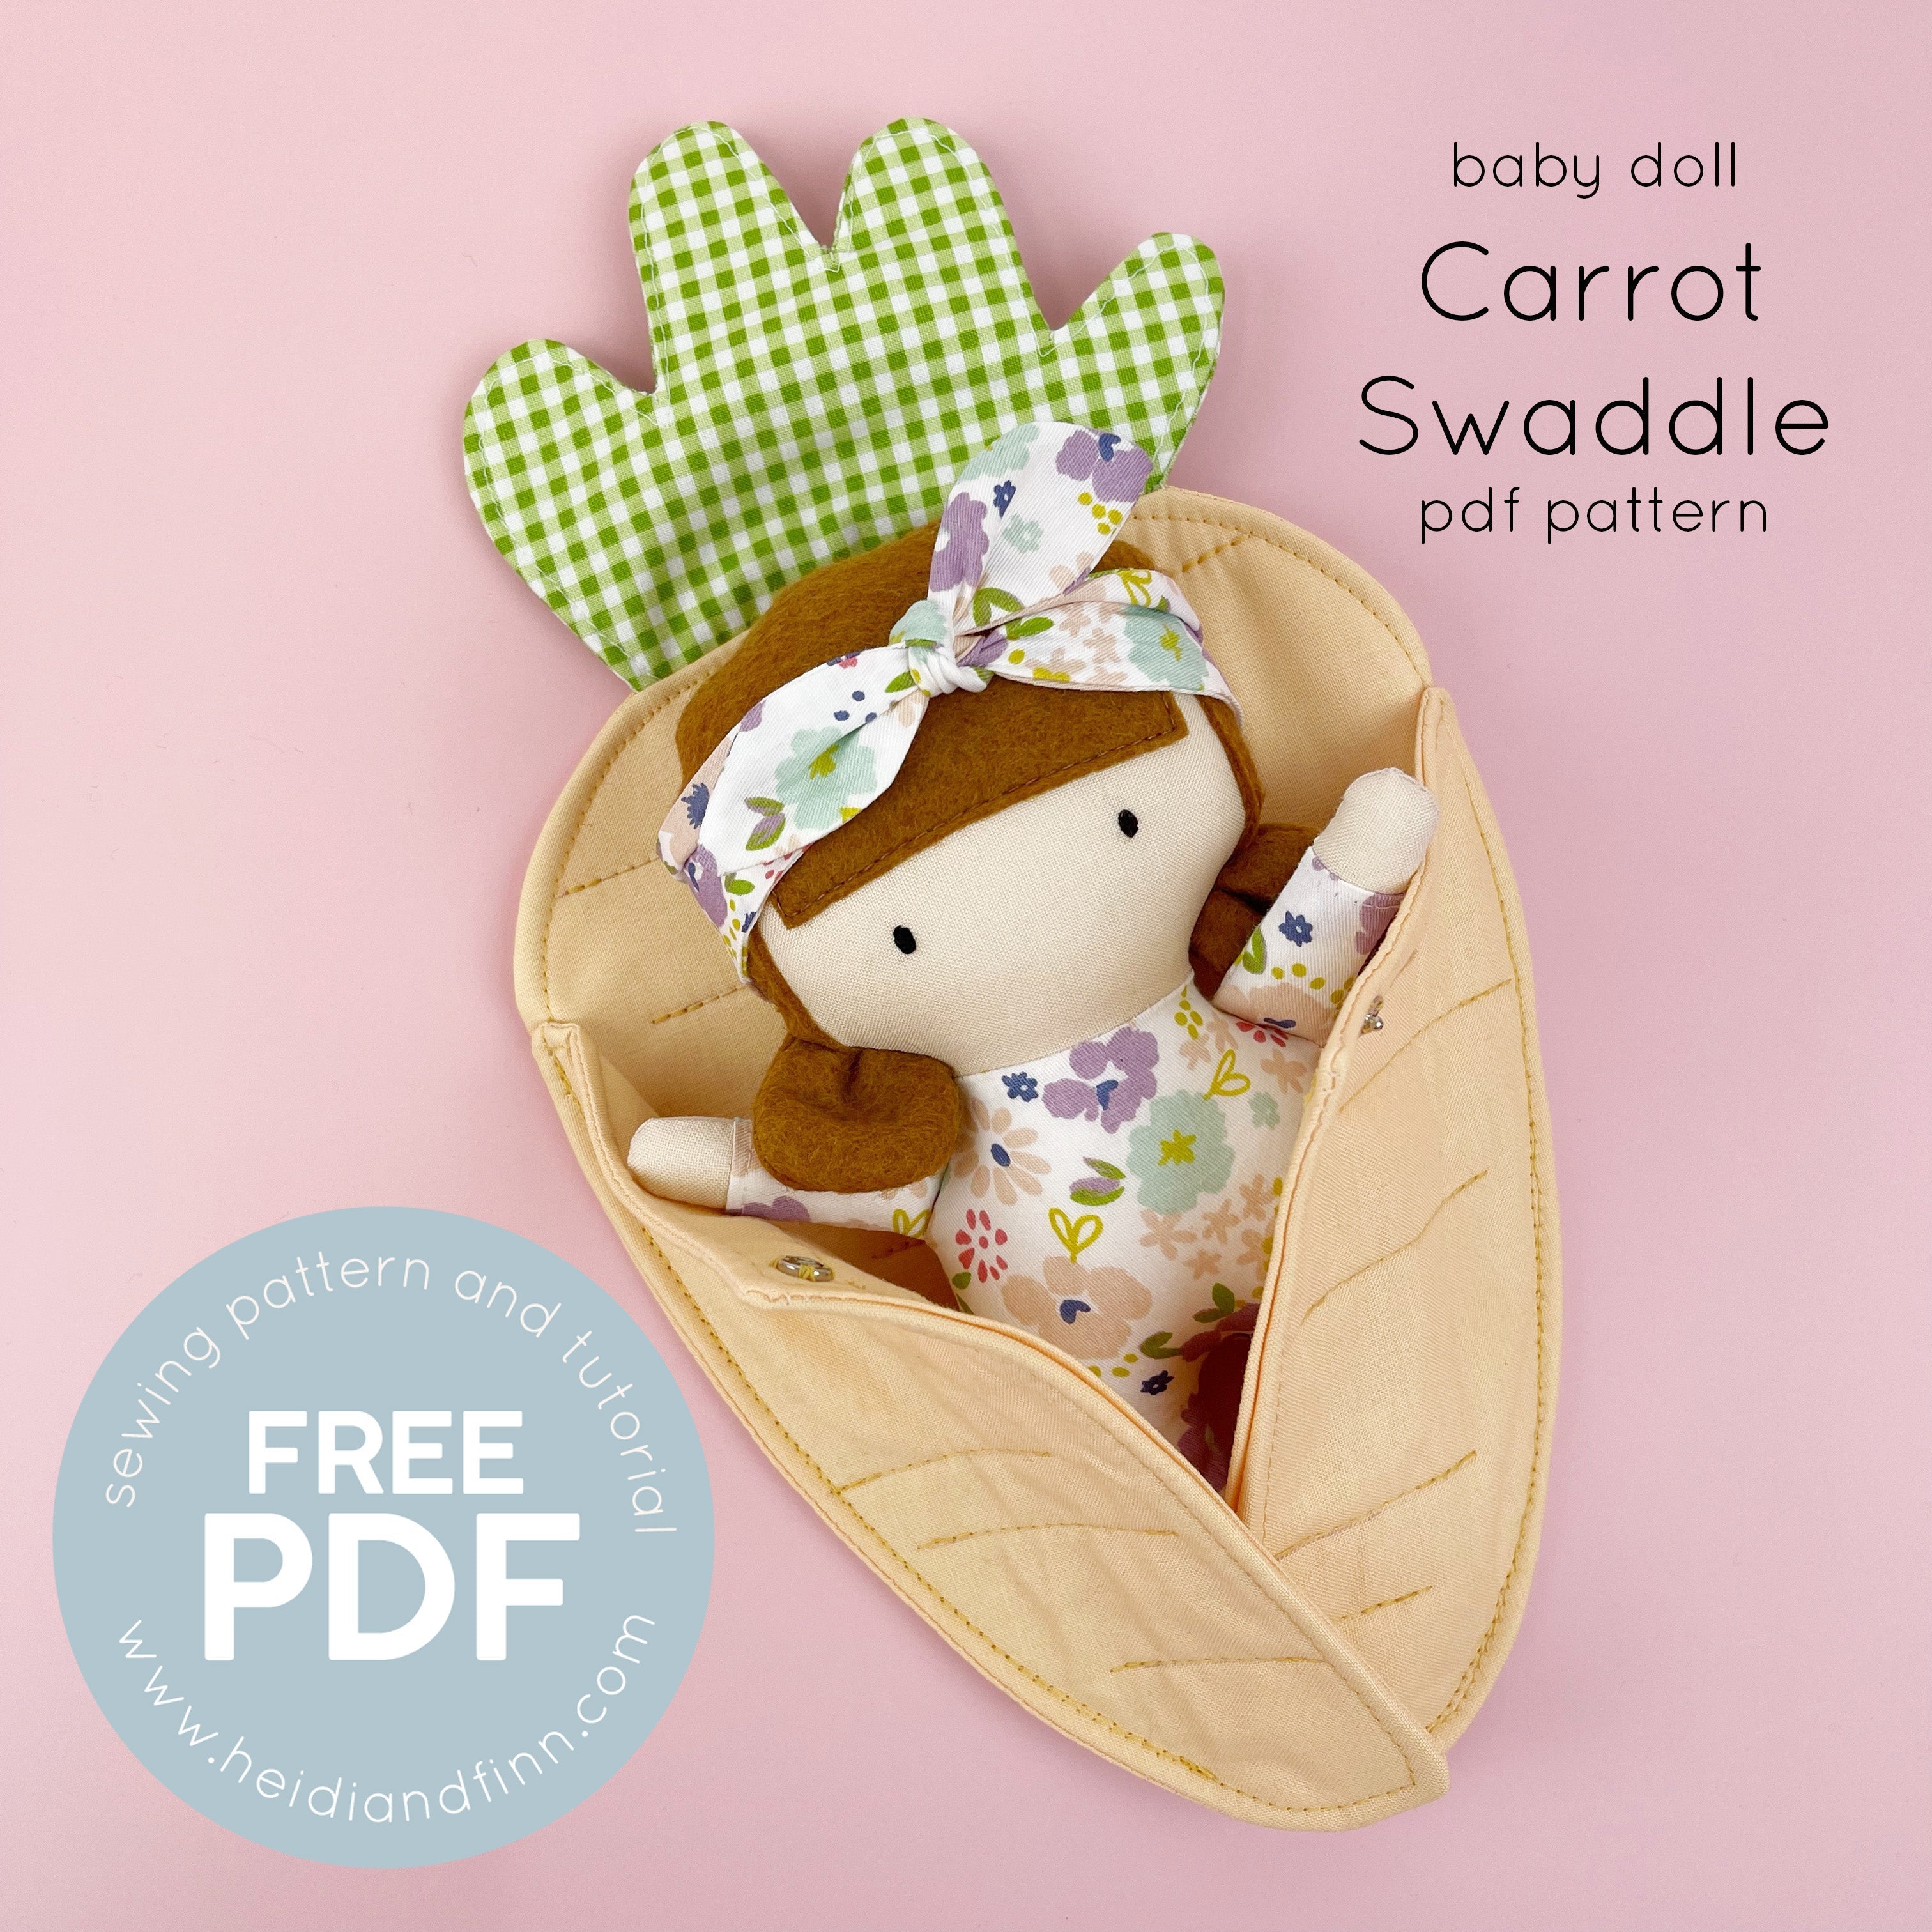 baby doll carrot swaddle - FREE